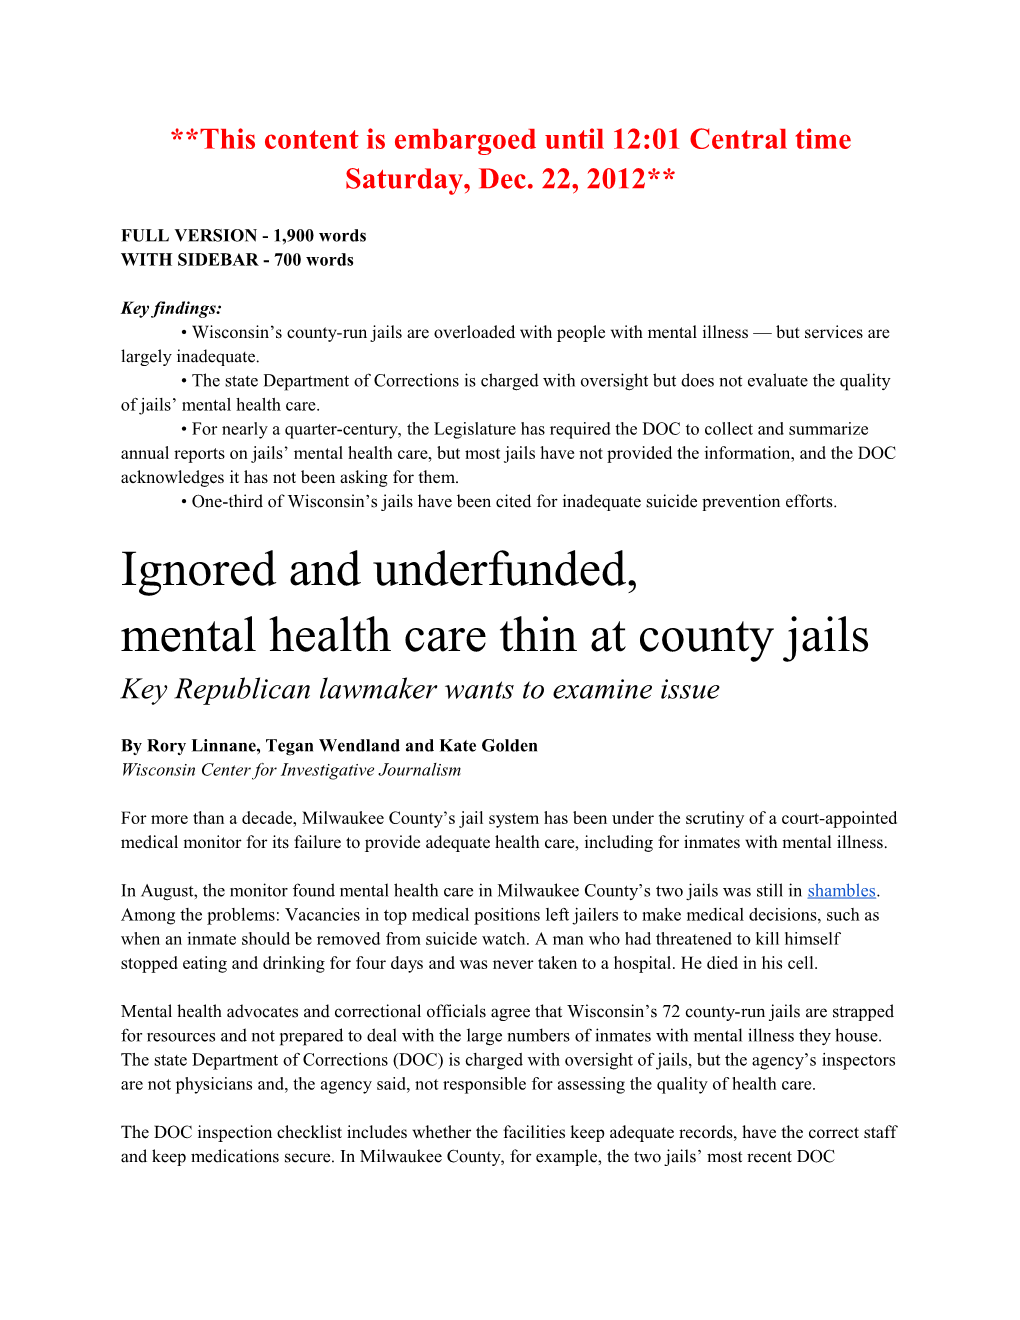 DRAFT 4: Mental Health in County Jails